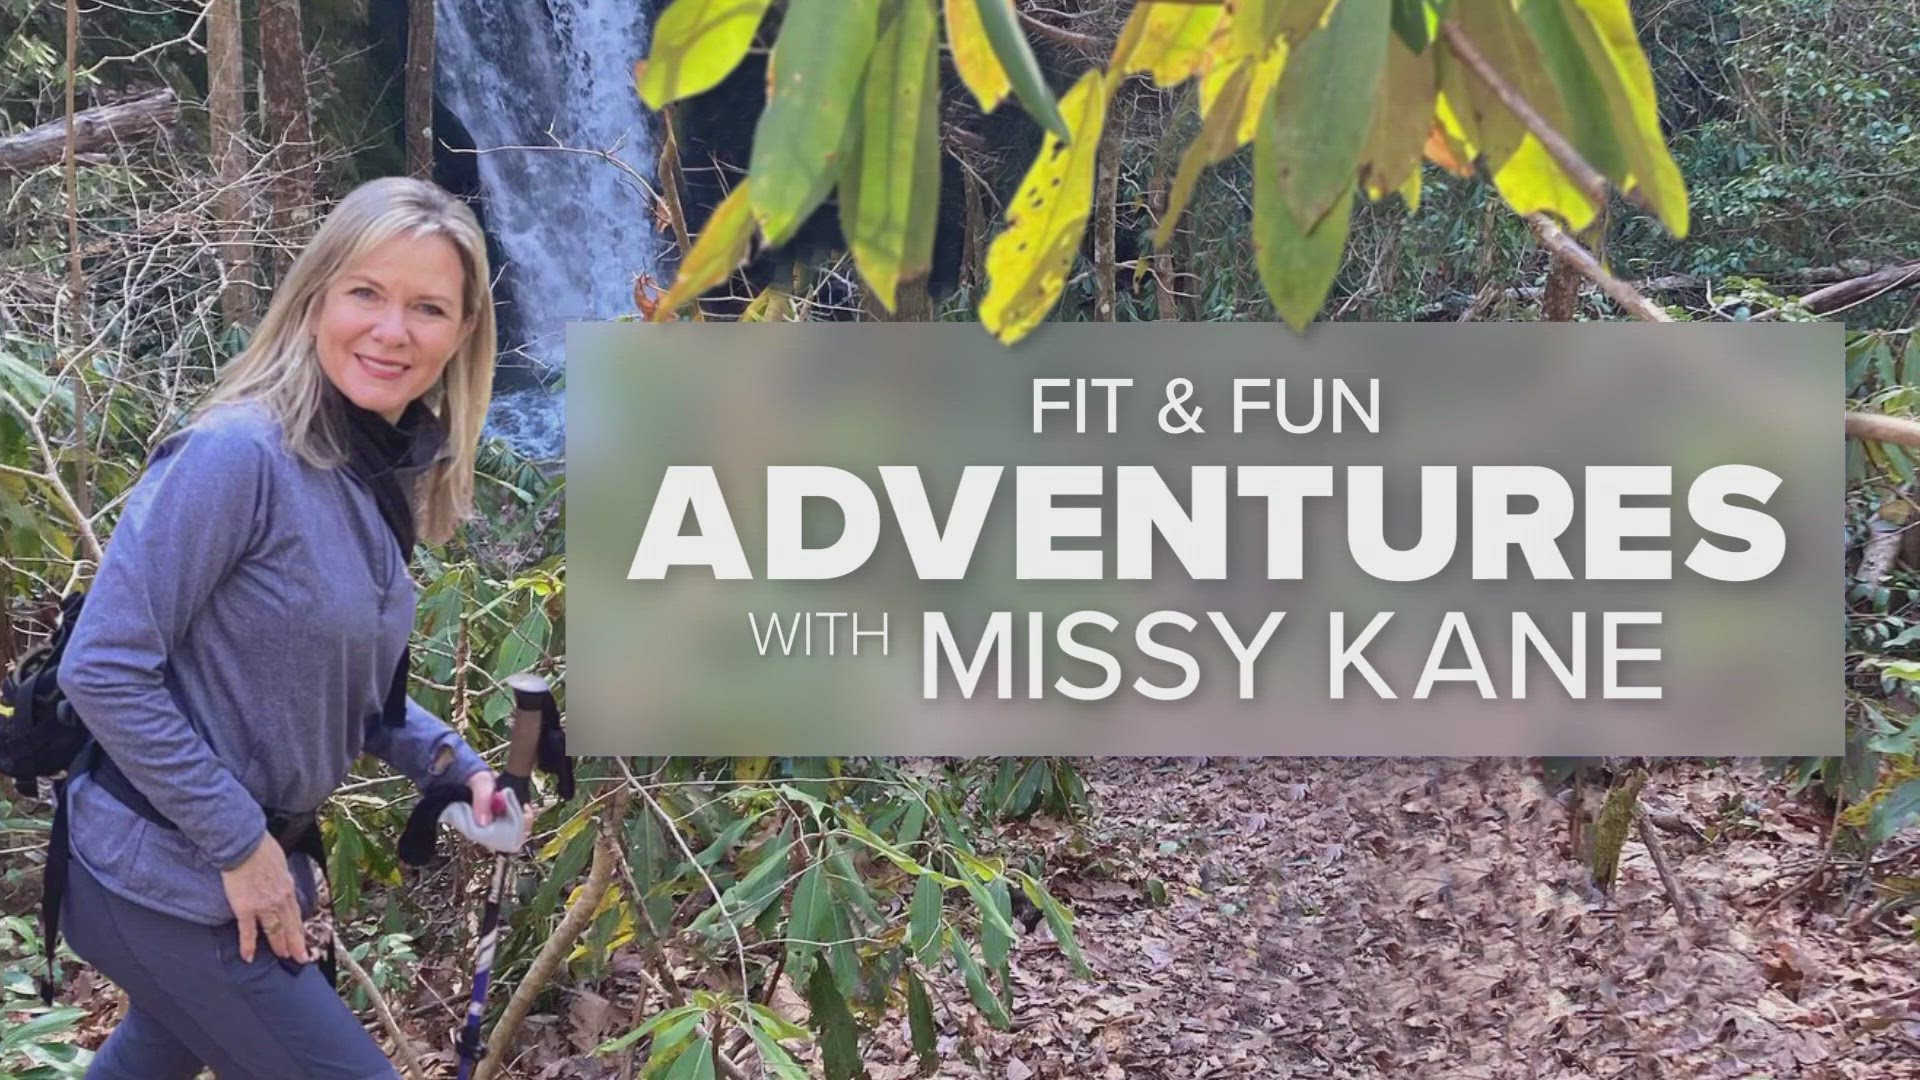 Former Olympian and fitness expert Missy Kane visits Seven Islands State Birding Park to talk about different activities you can do for the summer.